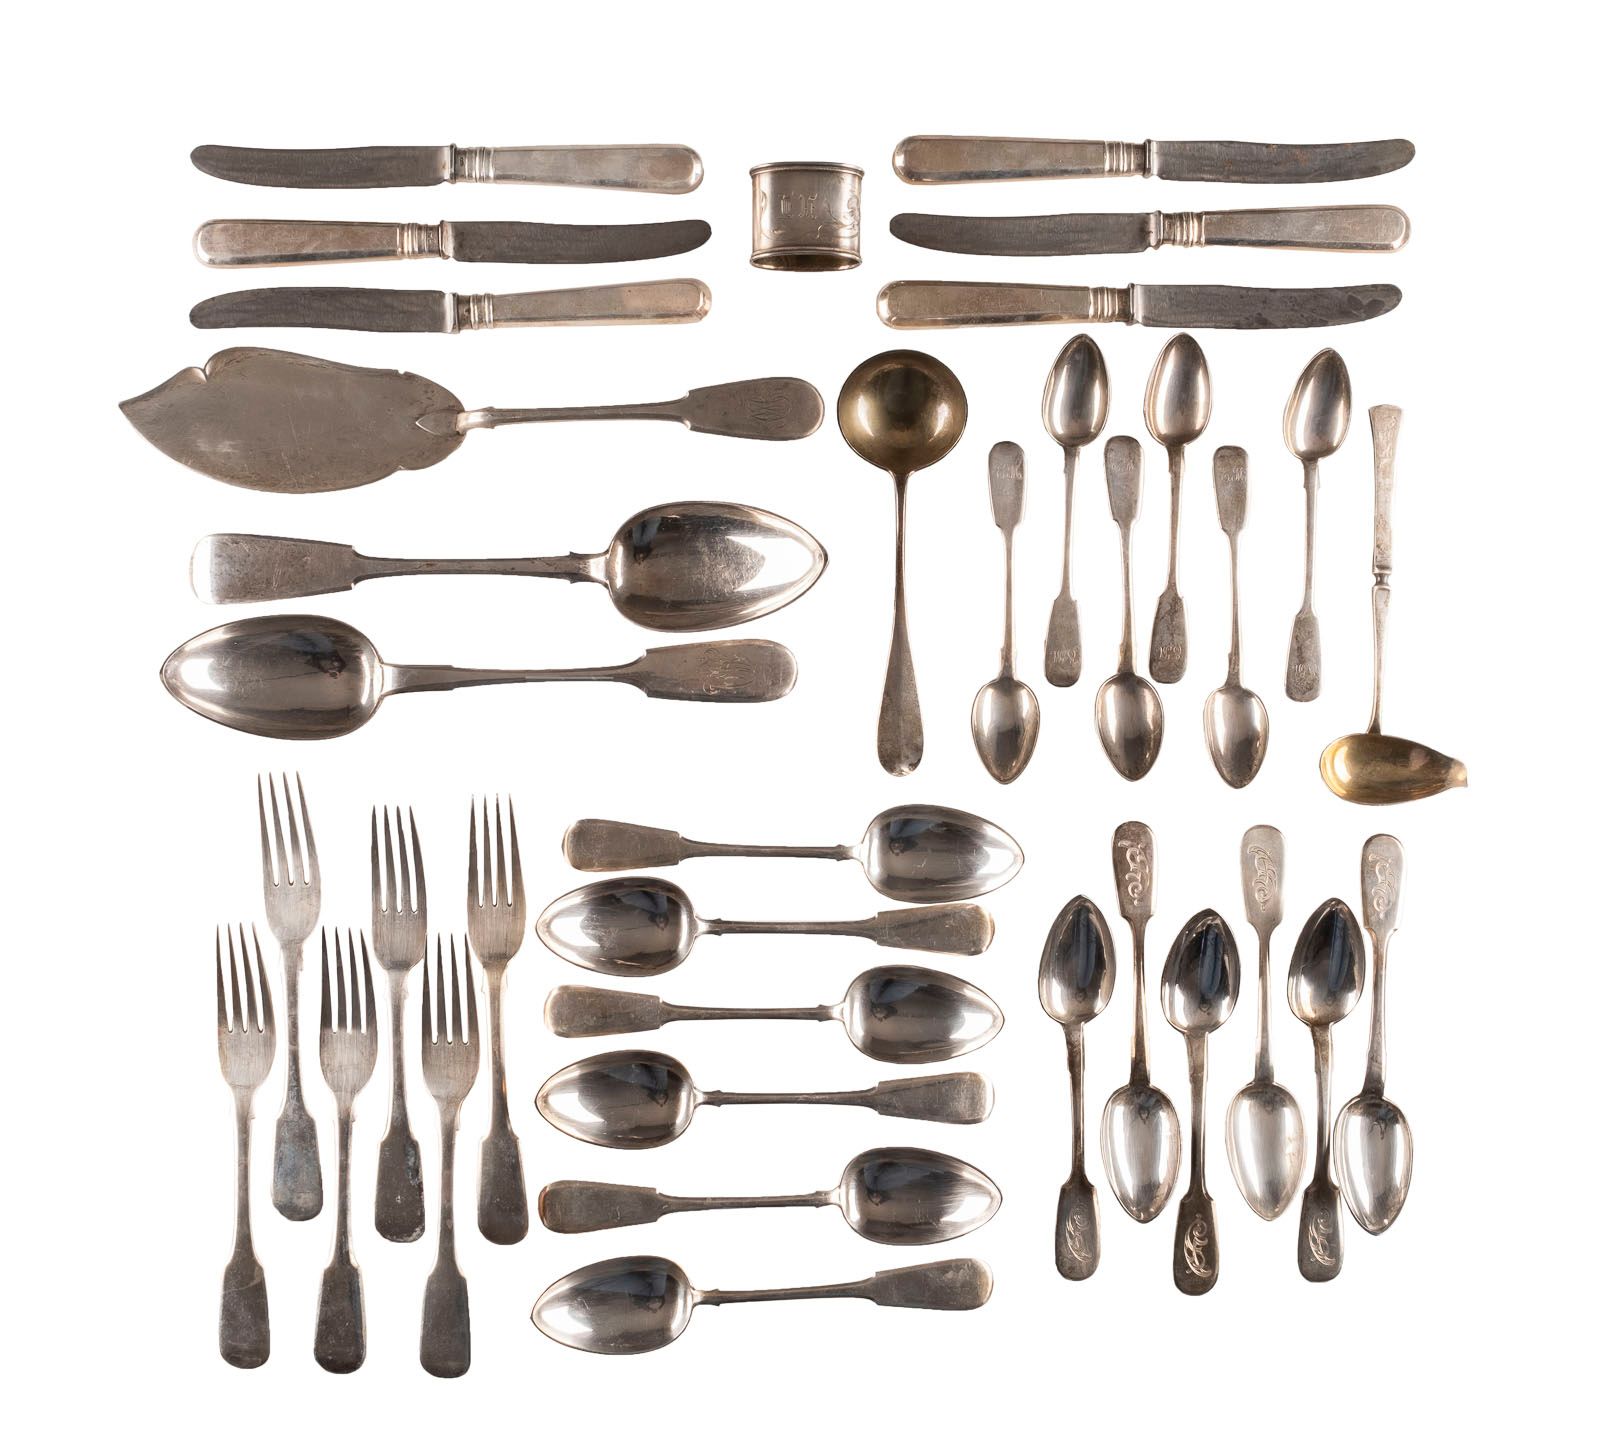 A COLLECTION OF 36 PIECES OF CUTLERY 36件餐具收藏 俄罗斯，圣彼得堡，19世纪末/莫斯科，1908-1917年/基辅，18&hellip;